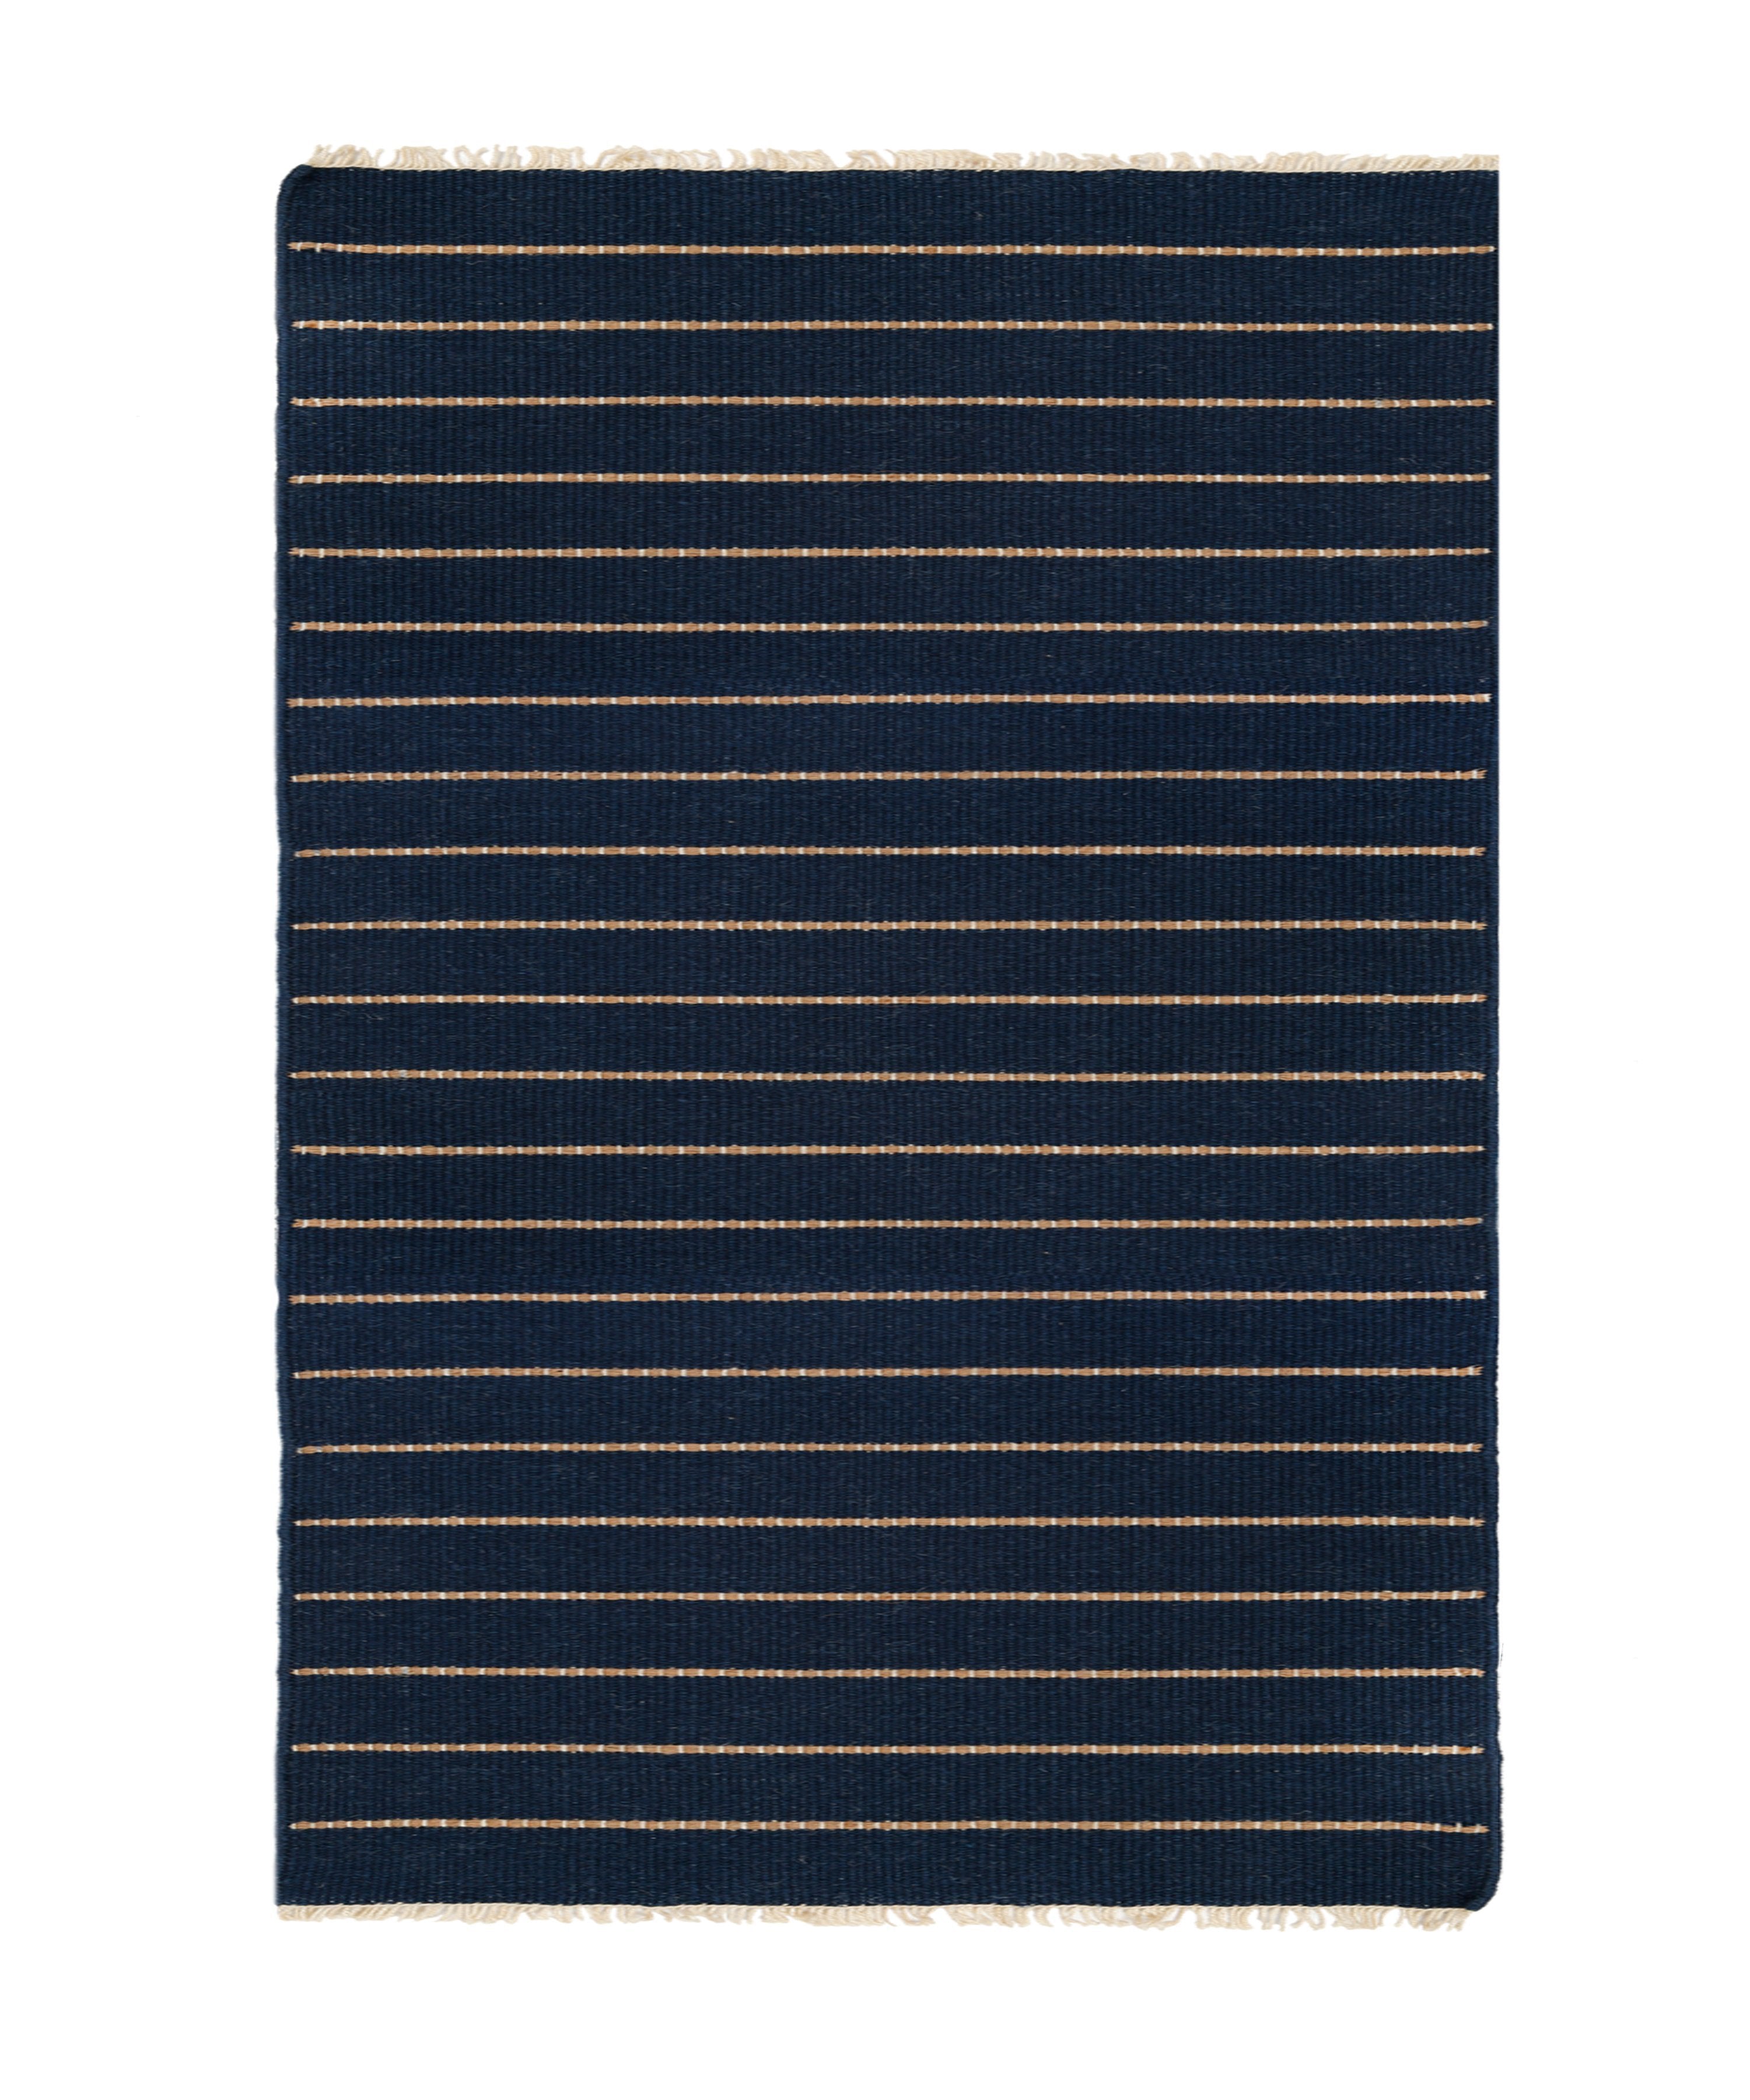 WARBY HANDWOVEN RUG - NAVY-Pom Pom at Home